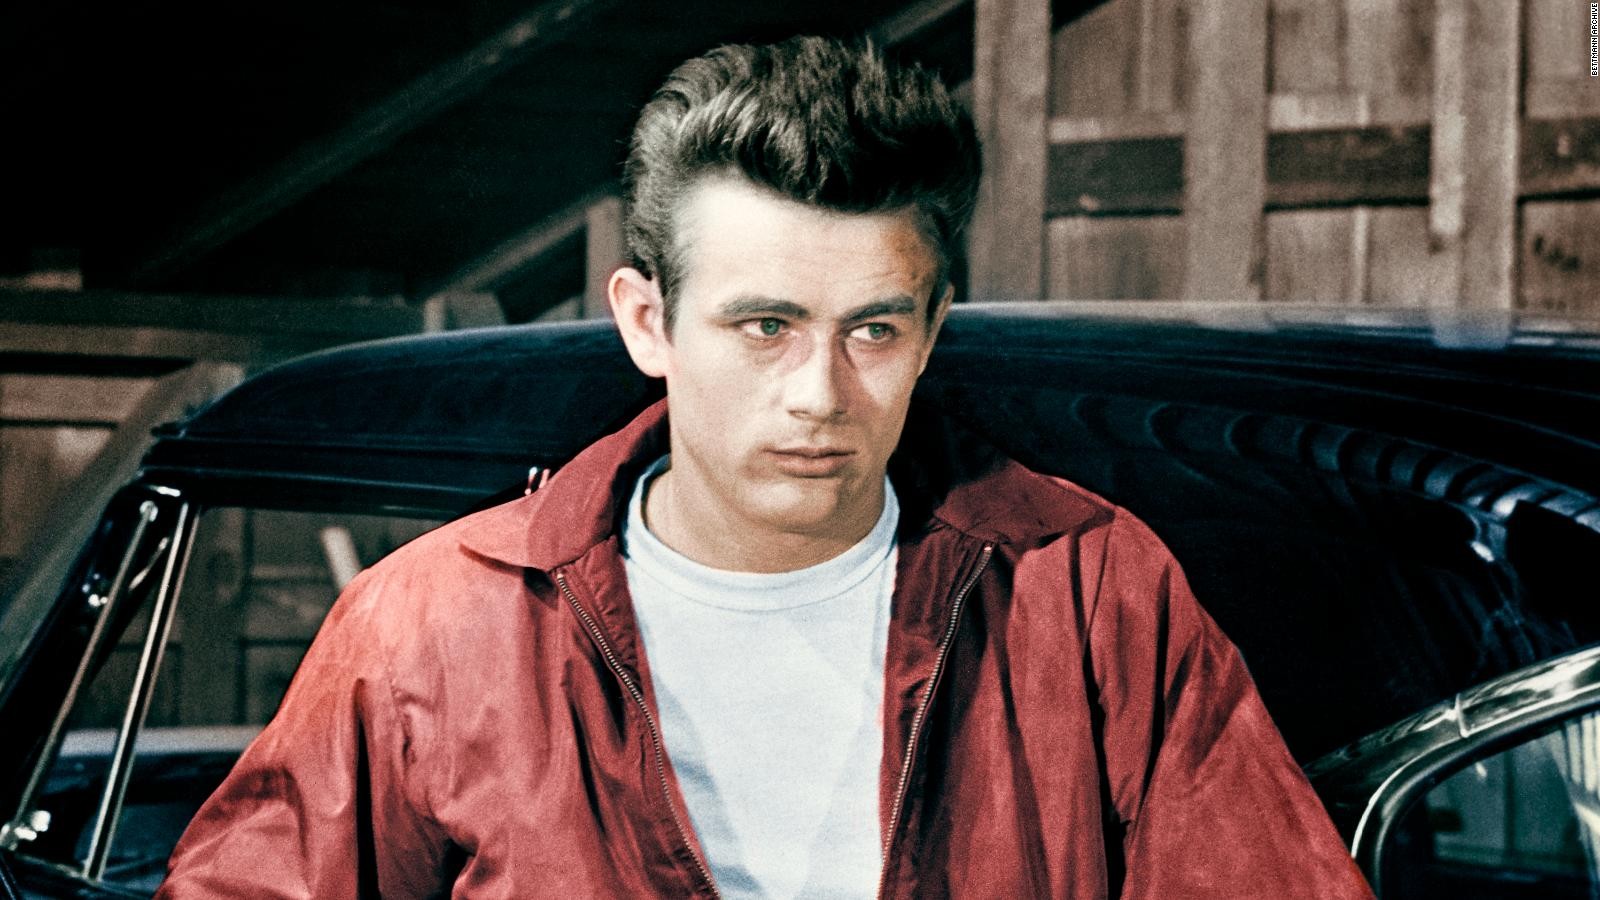 James Dean in a still from Rebel Without A Cause 